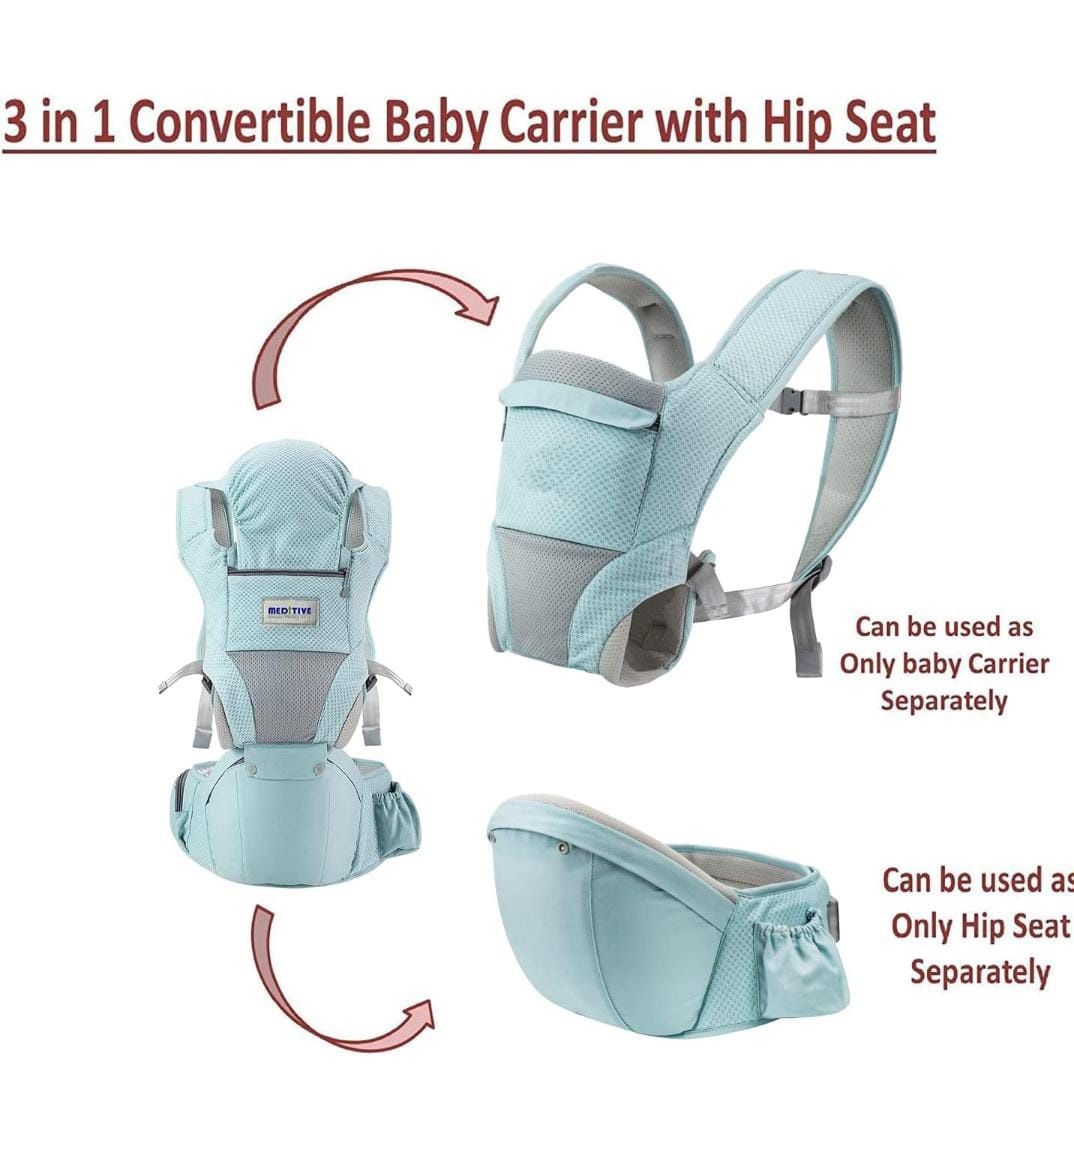 Hip Seat + Baby Carrier  